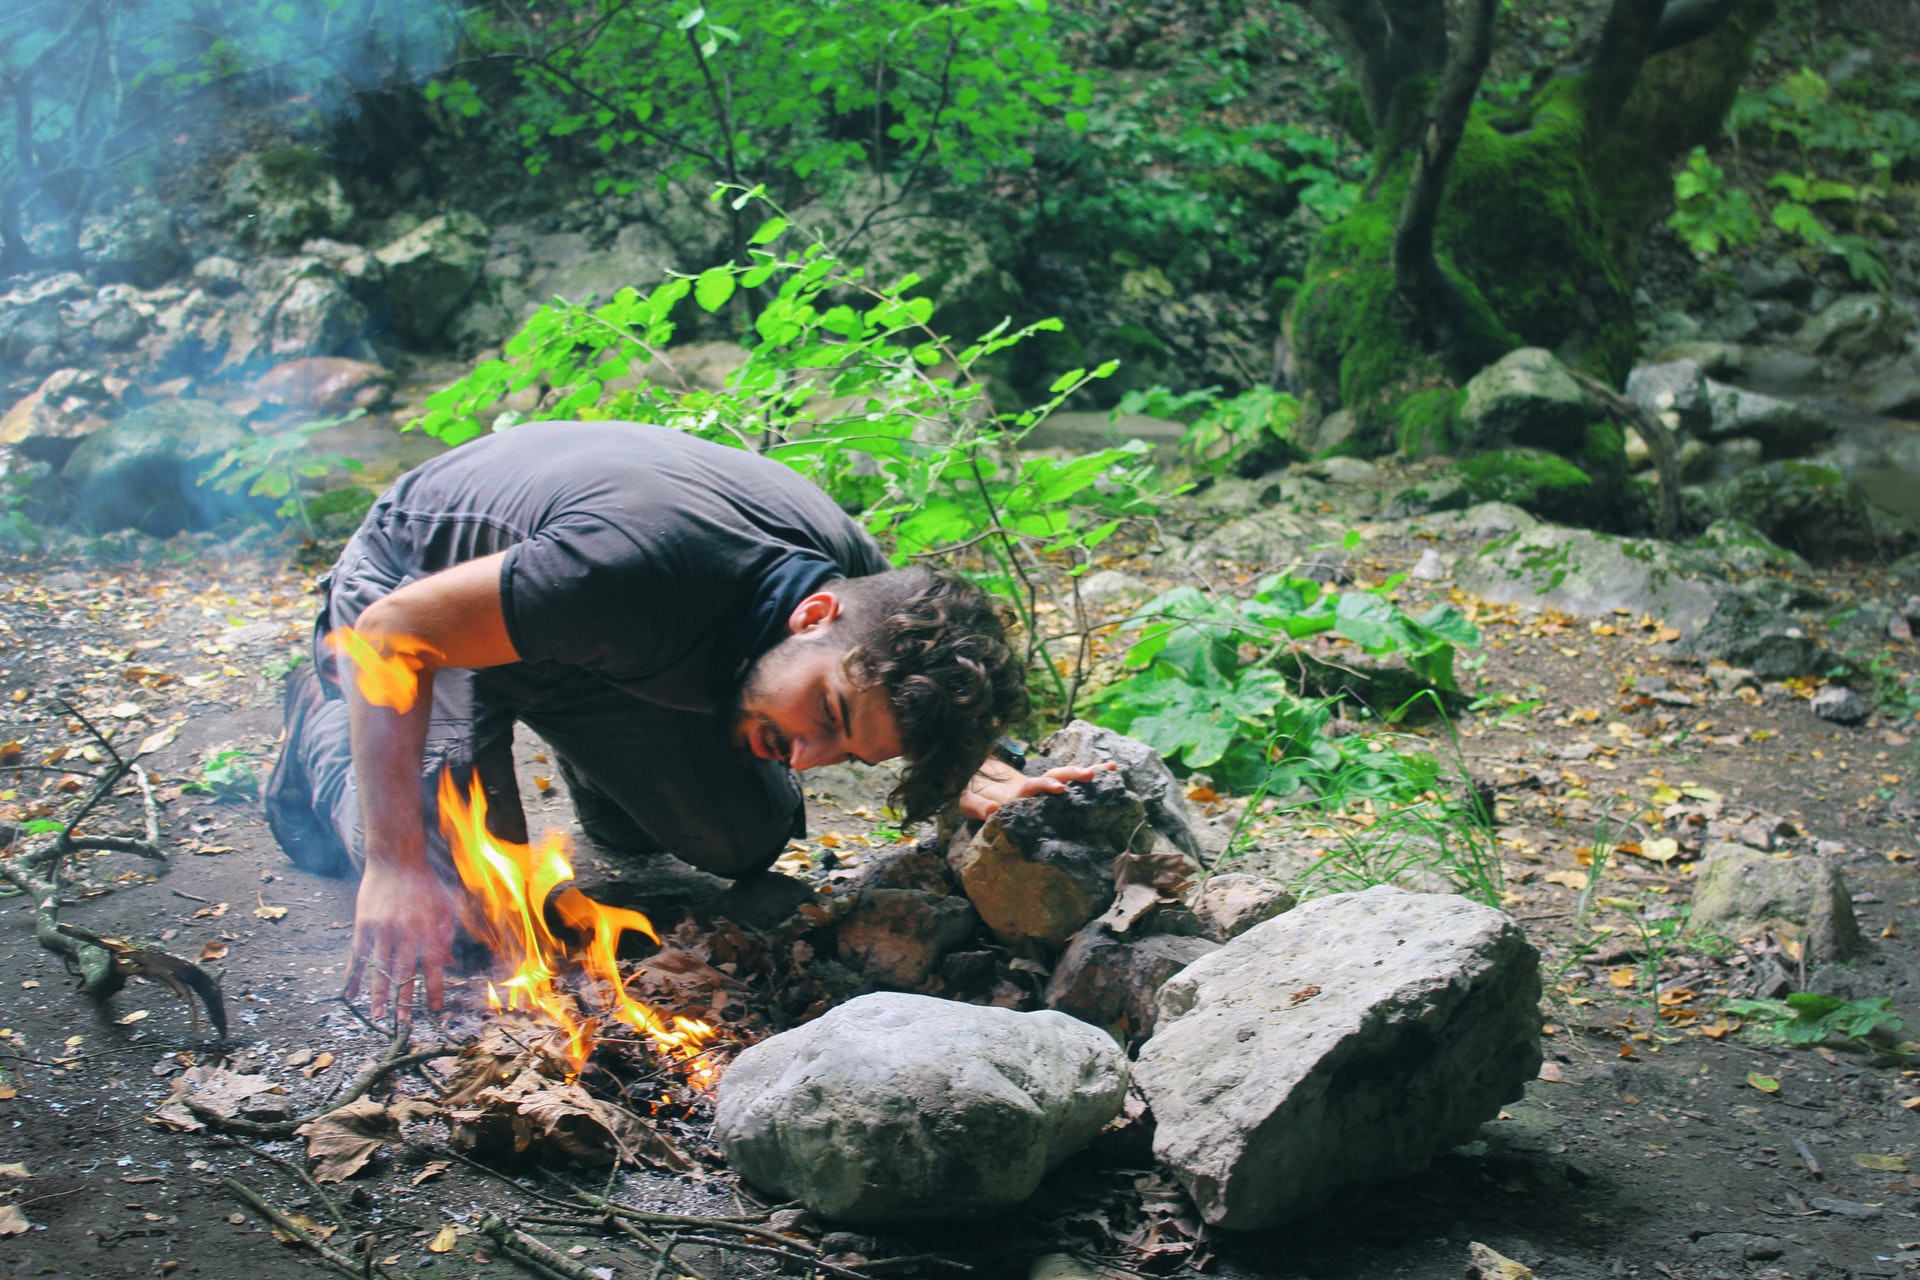 A person leaning down next to some rocks as they start a fire while survivalist camping.